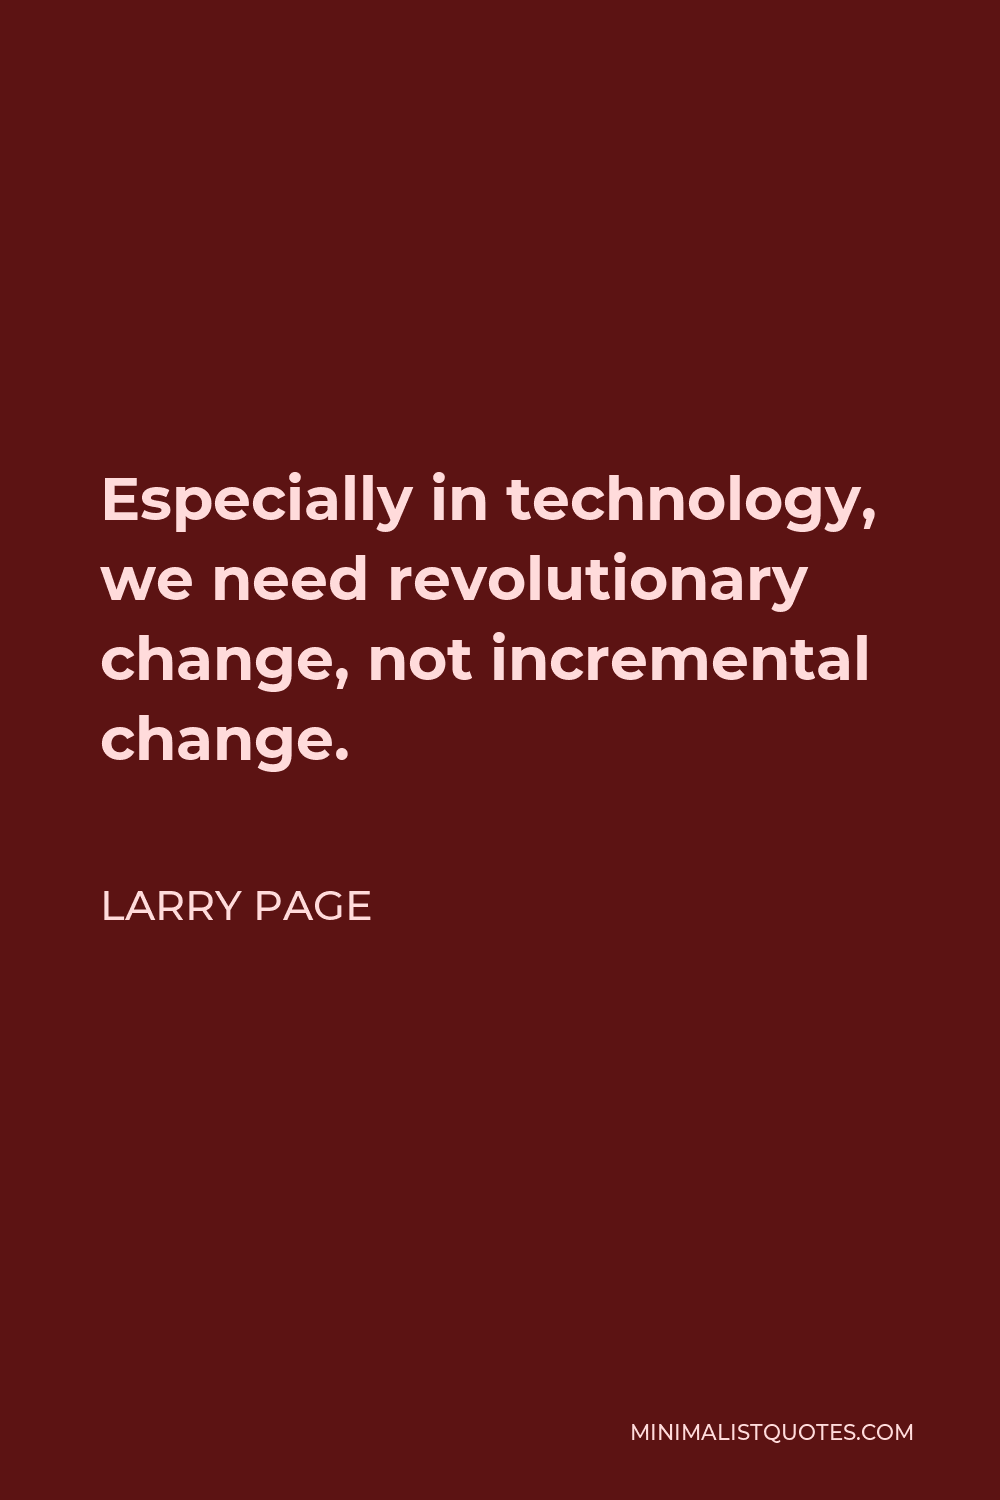 Larry Page Quote - Especially in technology, we need revolutionary change, not incremental change.